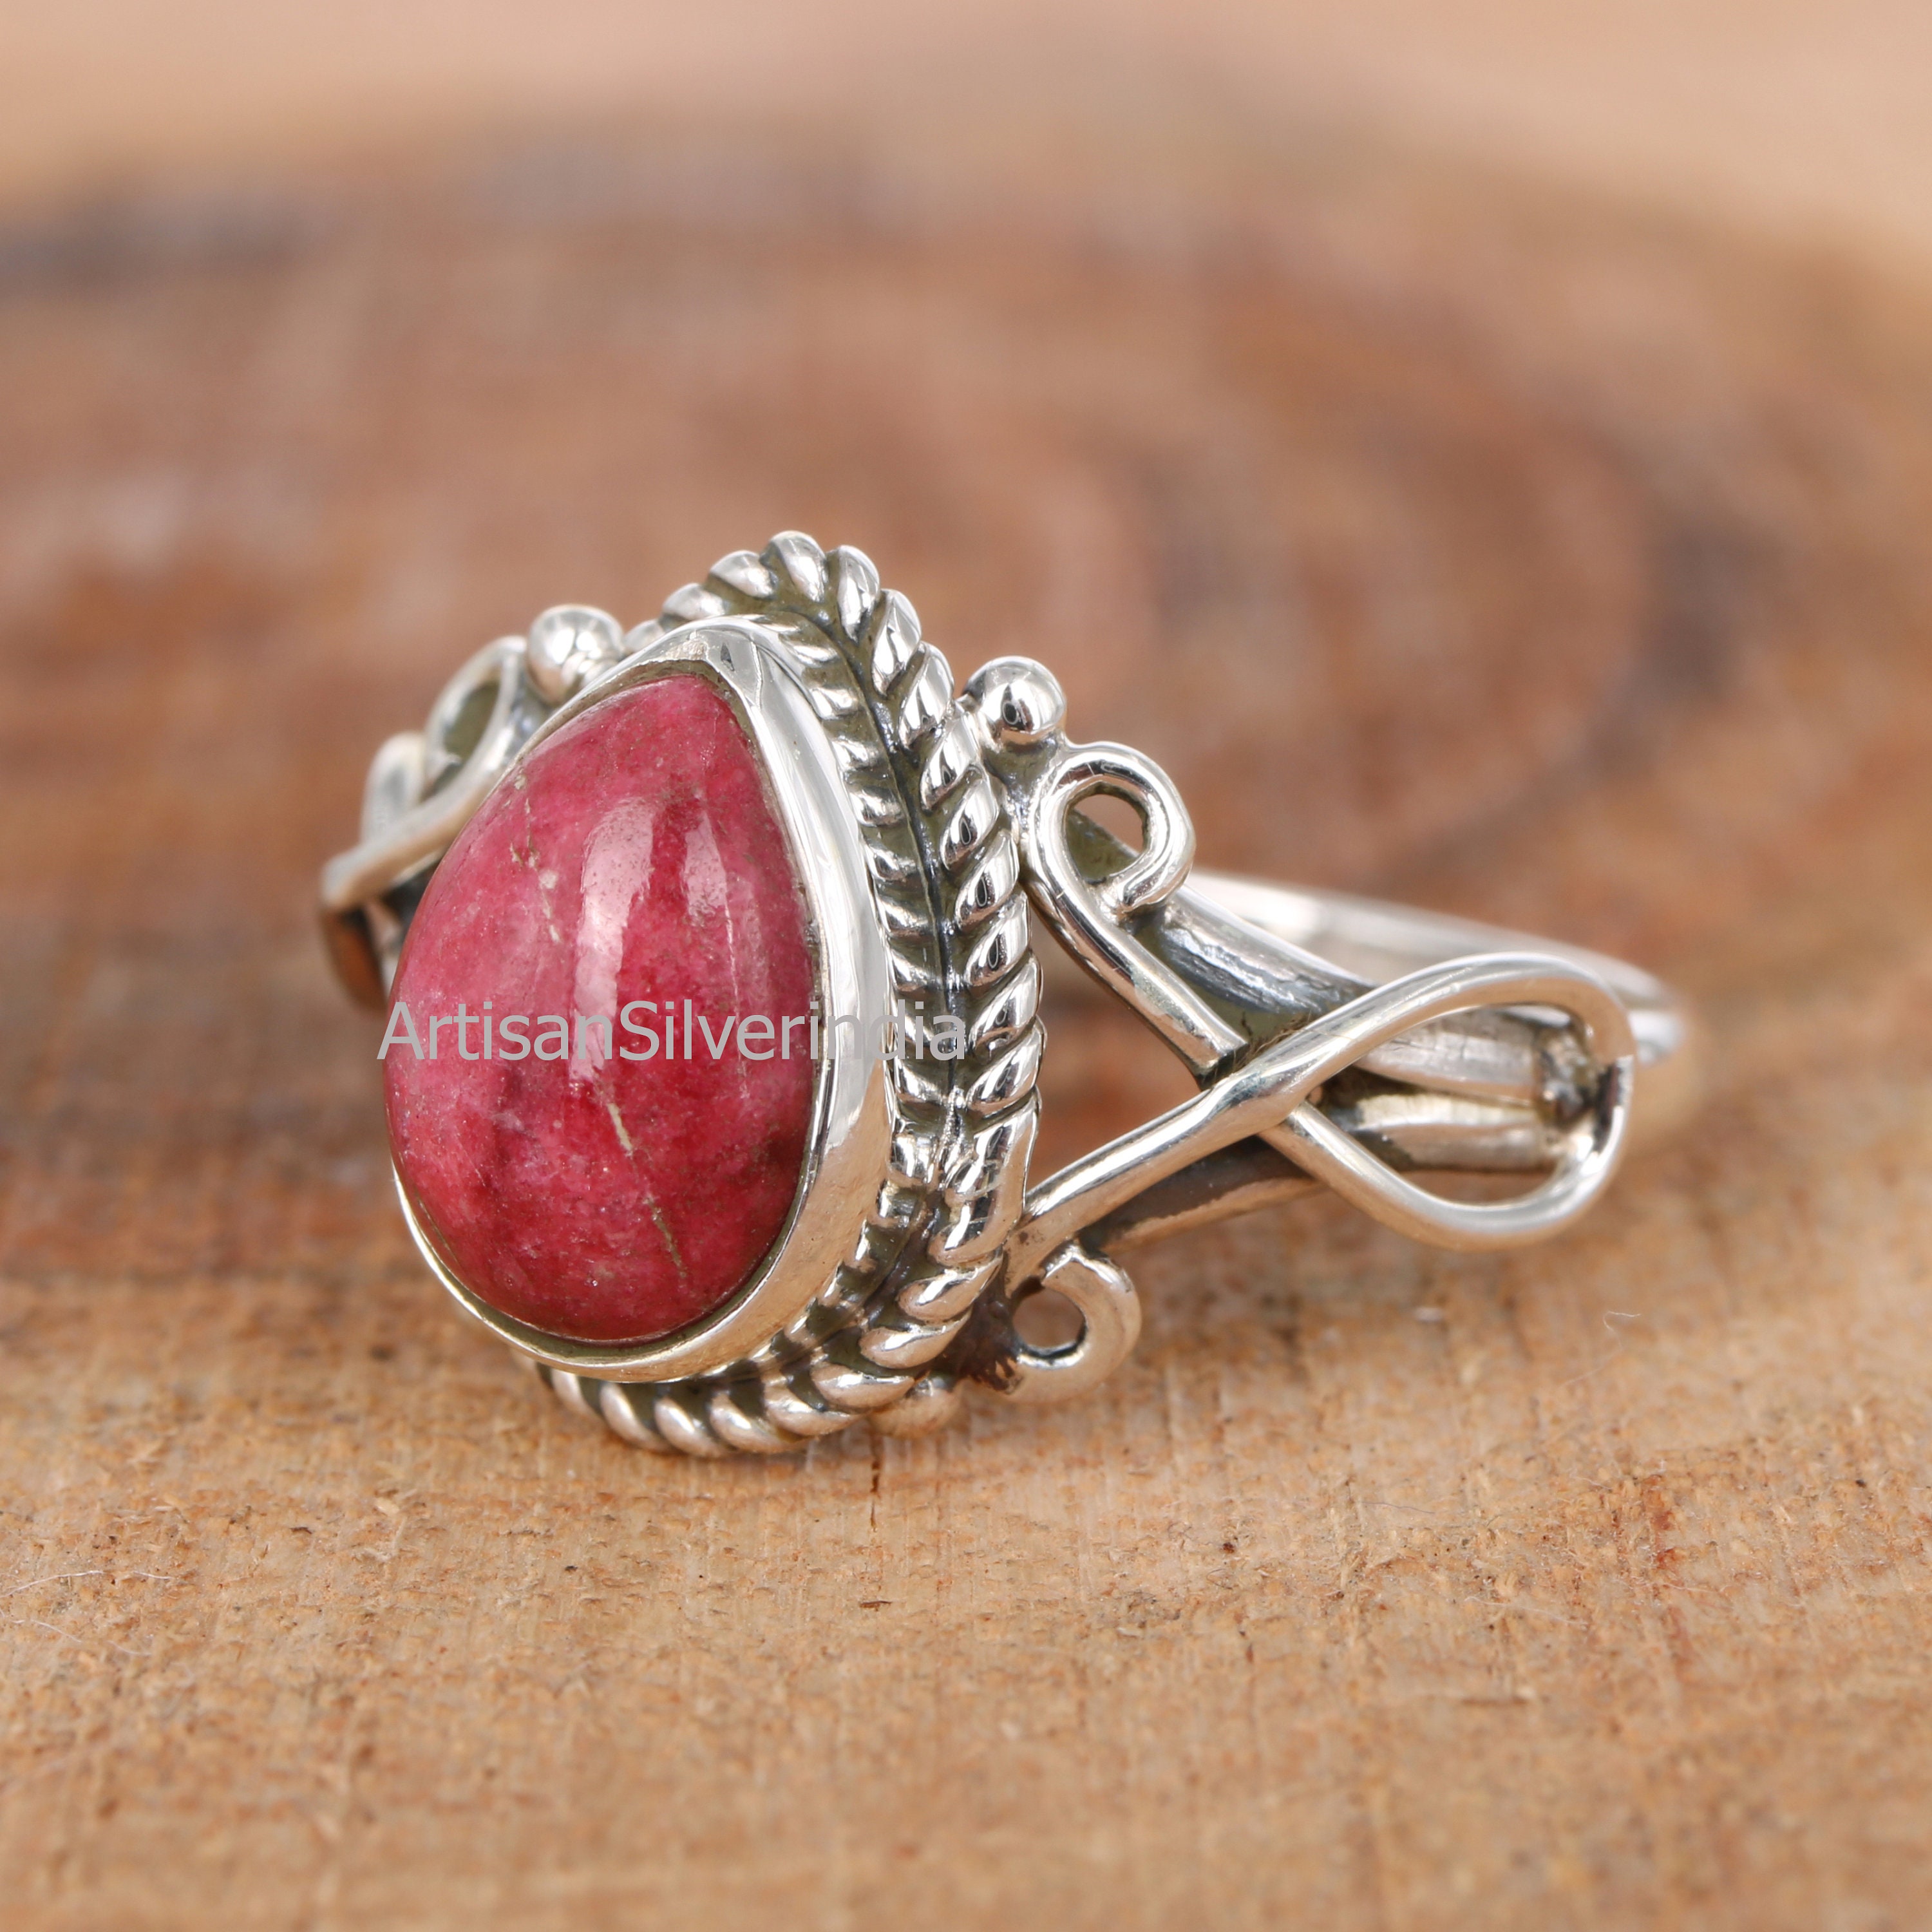 Thulite Ring, Pink Stone Ring, Self-Love Ring, Statement Ring, Women Ring, Gift for Her, Daily Wear Ring, Birthstone Ring, Friendship Ring, Love